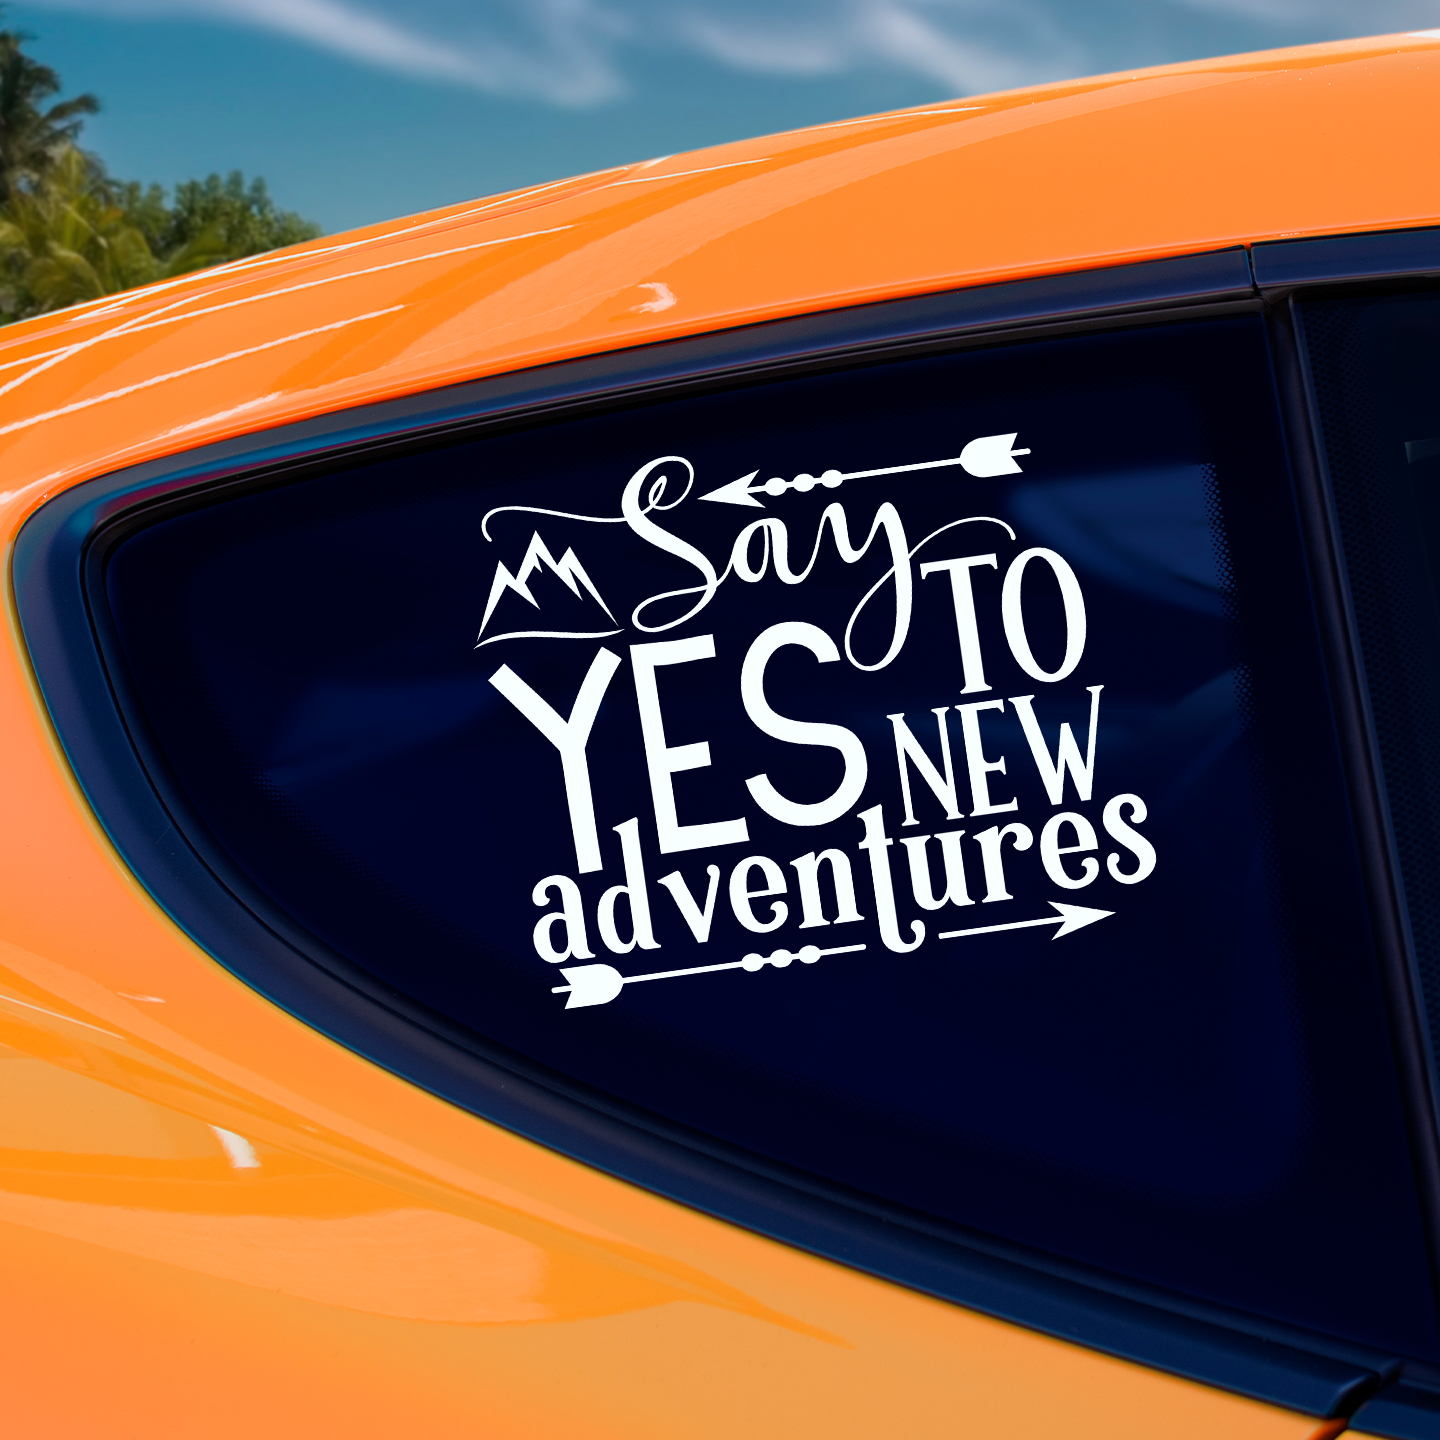 Say Yes To New Adventures Sticker